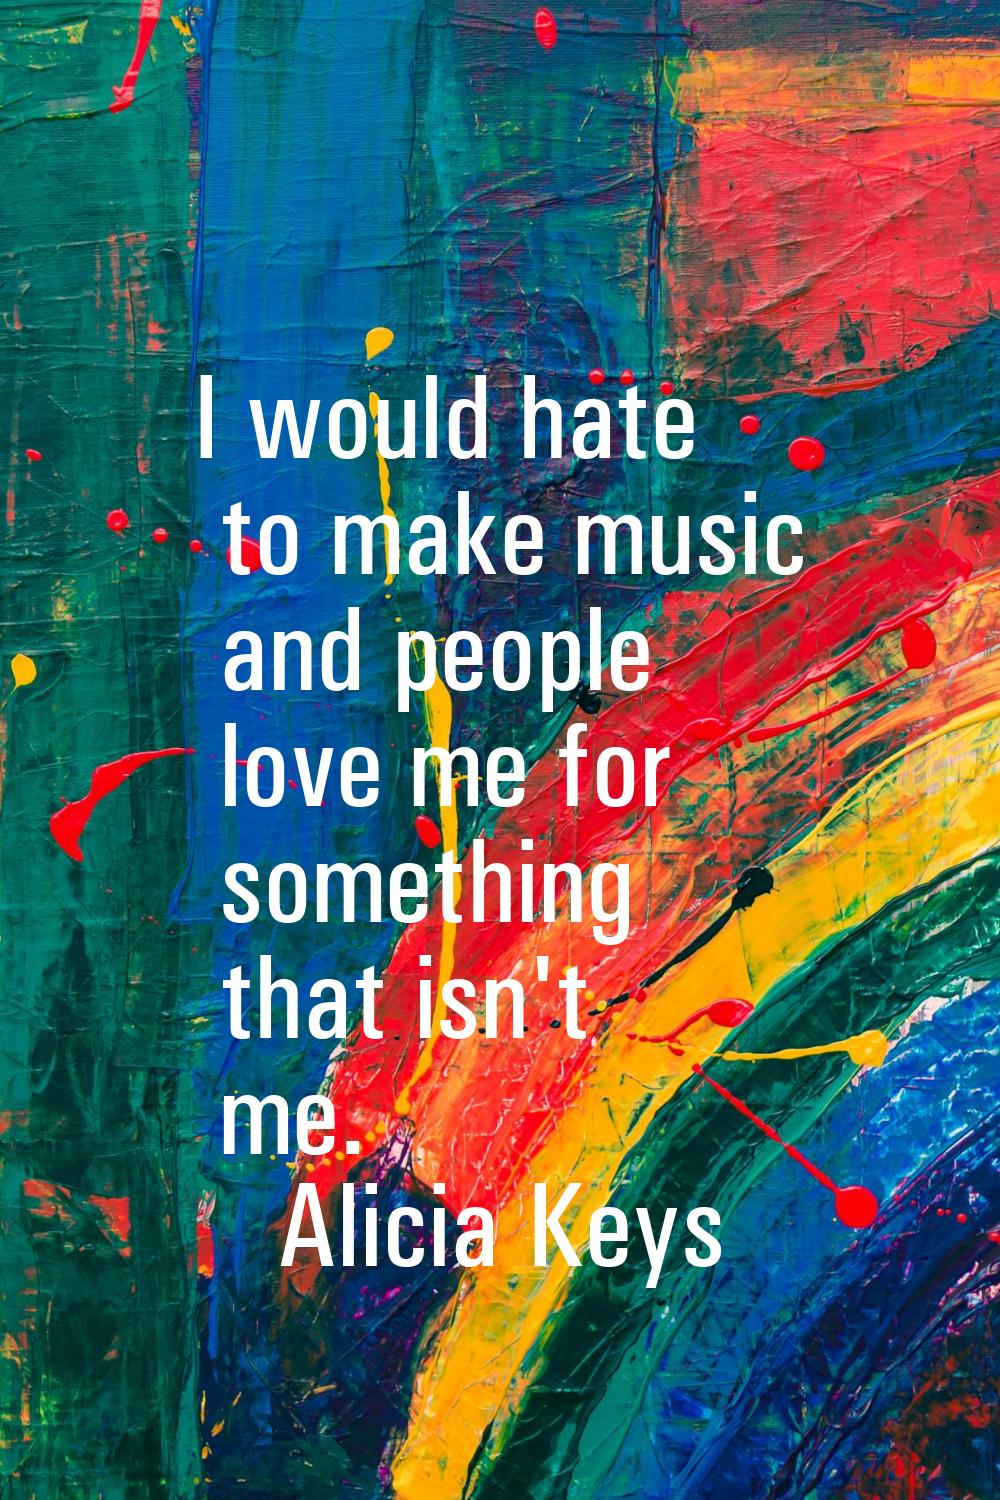 I would hate to make music and people love me for something that isn't me.